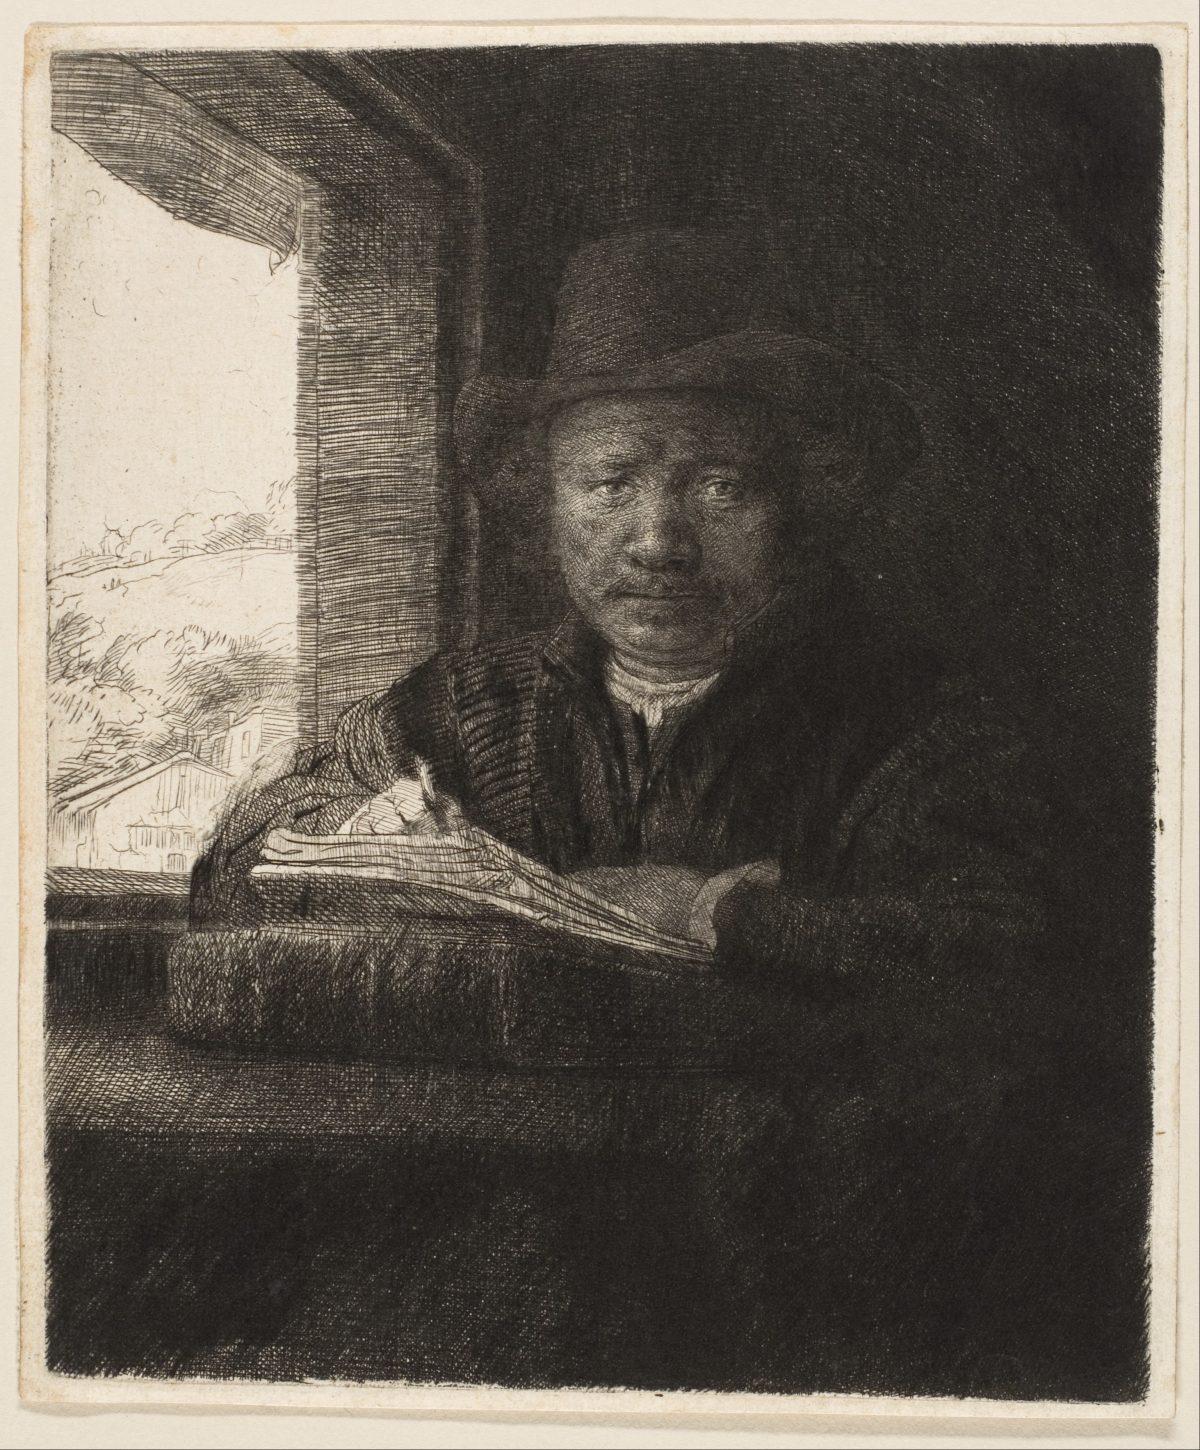 “Self-Portrait Etching at a Window,” 1648, Rembrandt van Rijn. Etching, drypoint, and burin; fourth state of nine. Sheet: 6 7/16 inches (16.3 cm). The Sylmaris Collection, gift of George Coe Graves, 1920. (The Metropolitan Museum of Art)